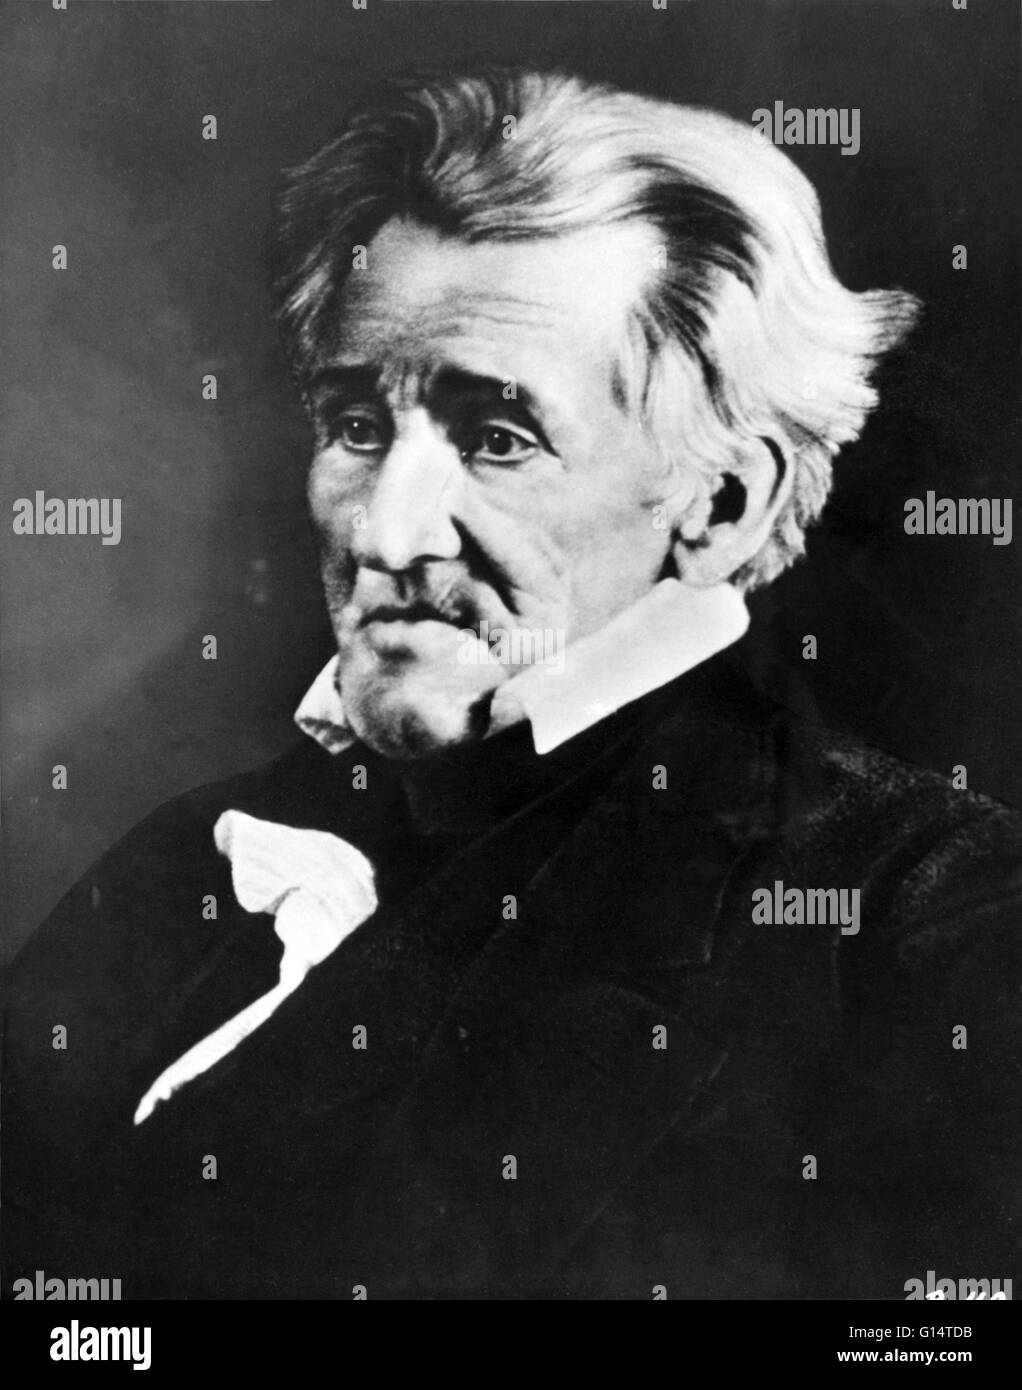 Jackson photographed in 1845.Andrew Jackson (March 15, 1767 - June 8, 1845) was the seventh President of the United States (1829-1837). He was a politician and army general who defeated the Creek Indians at the Battle of Horseshoe Bend (1814), and the Bri Stock Photo